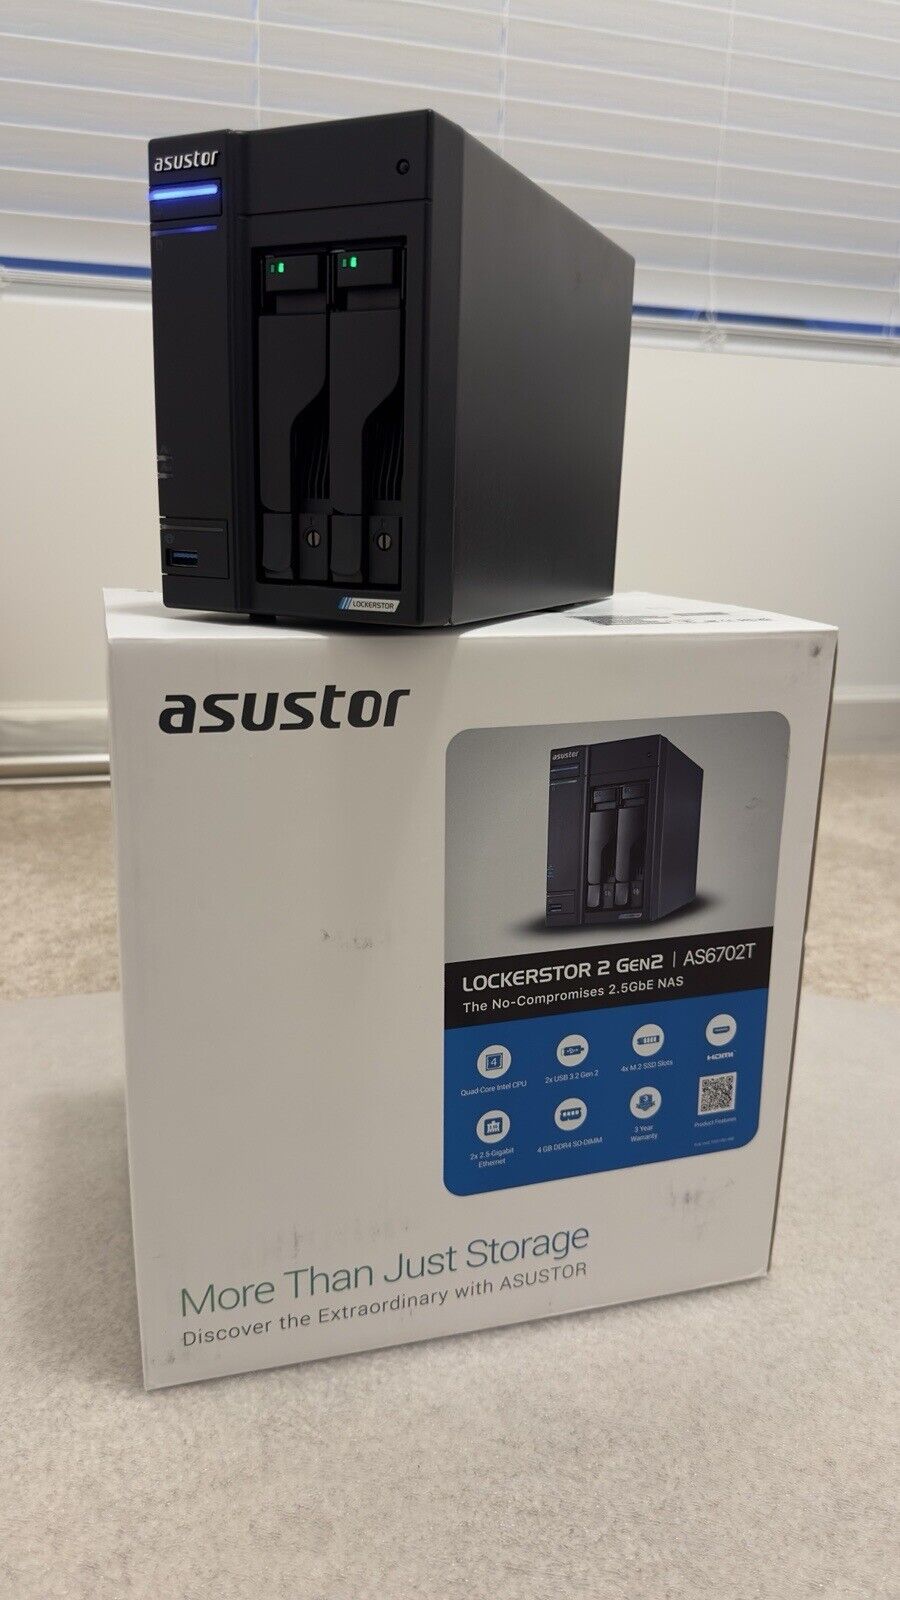 Asustor 2 Gen2, NAS, Quad-Core, 16GB Of Ram And 8TB Of Storage *Free Shipping*